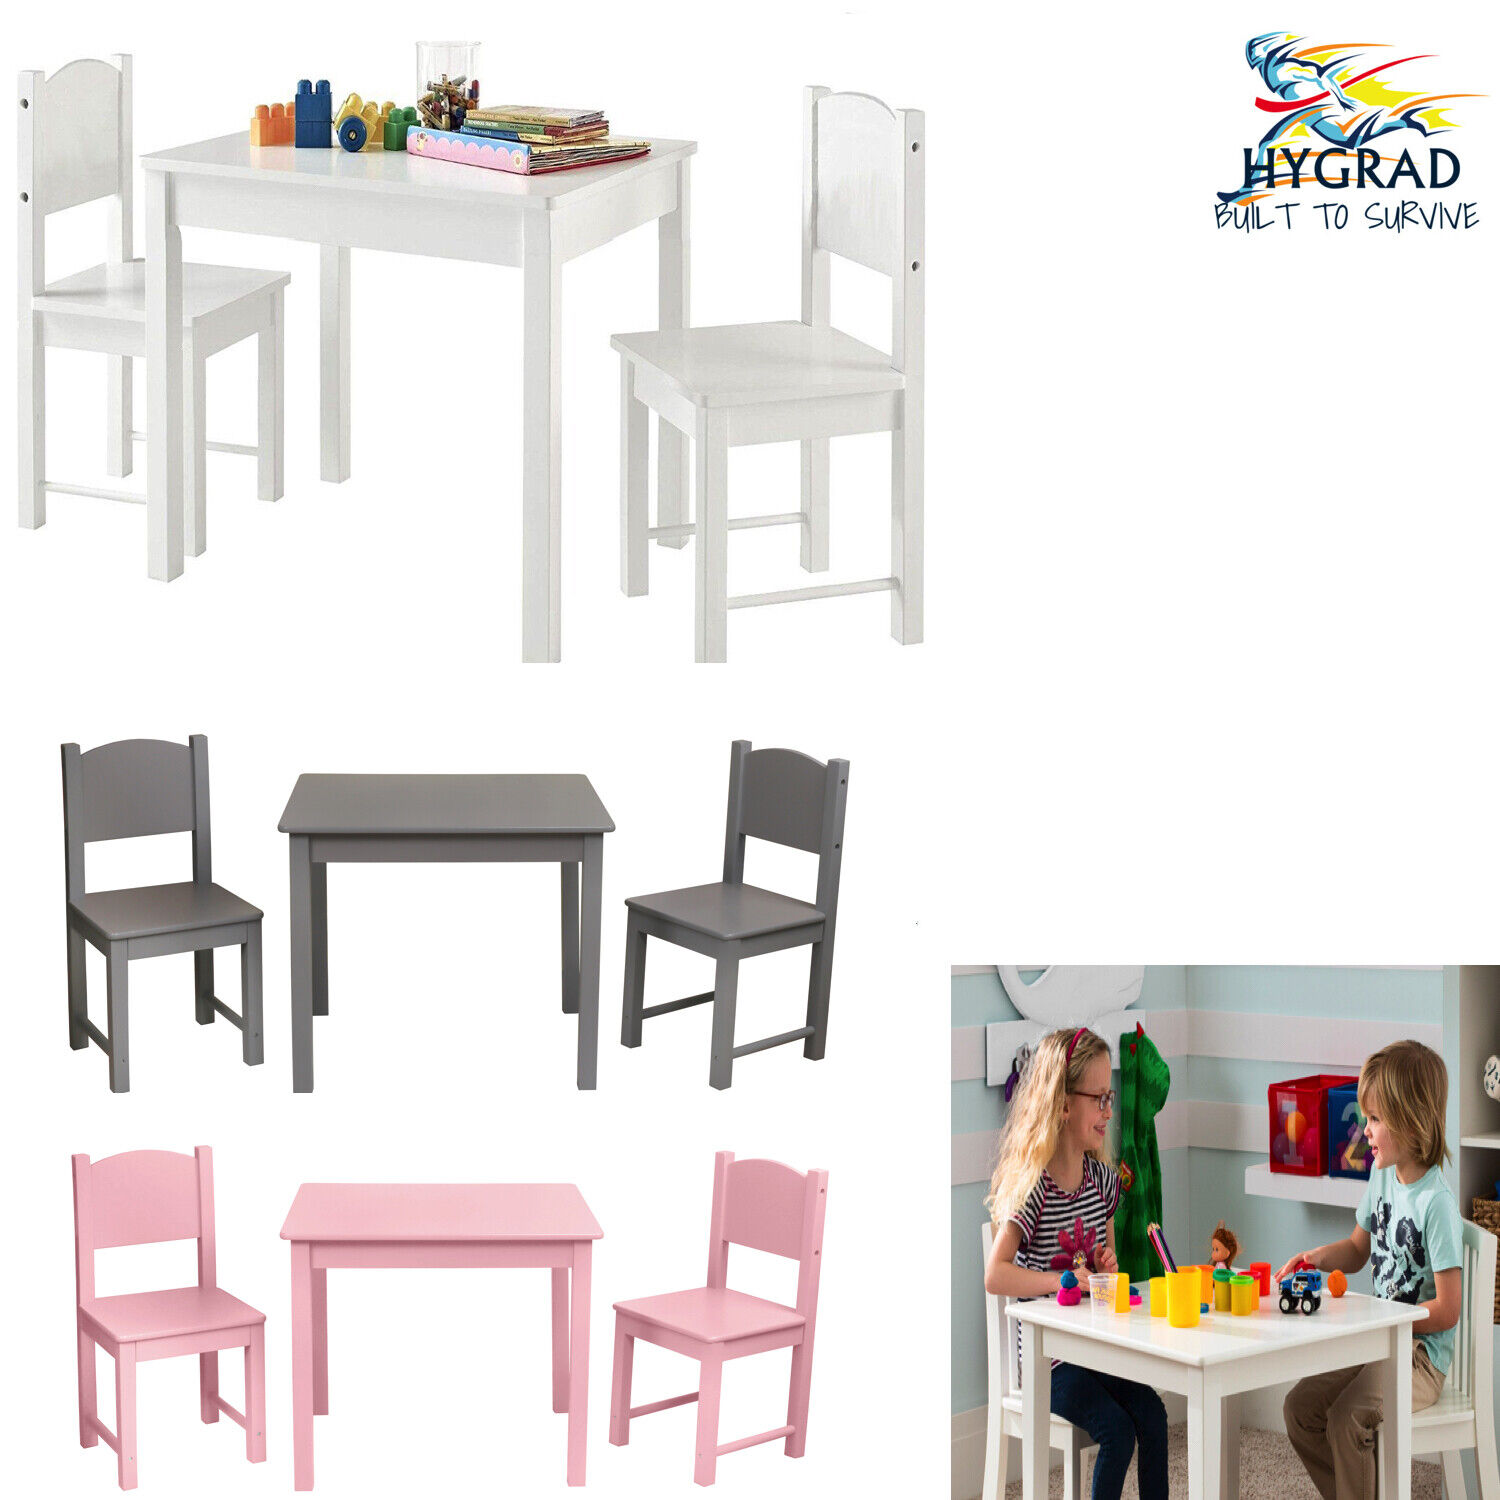 KIDS CHILDRENS TABLE AND 18 CHAIRS SET FOR BOYS OR GIRLS BEST GIFT ...